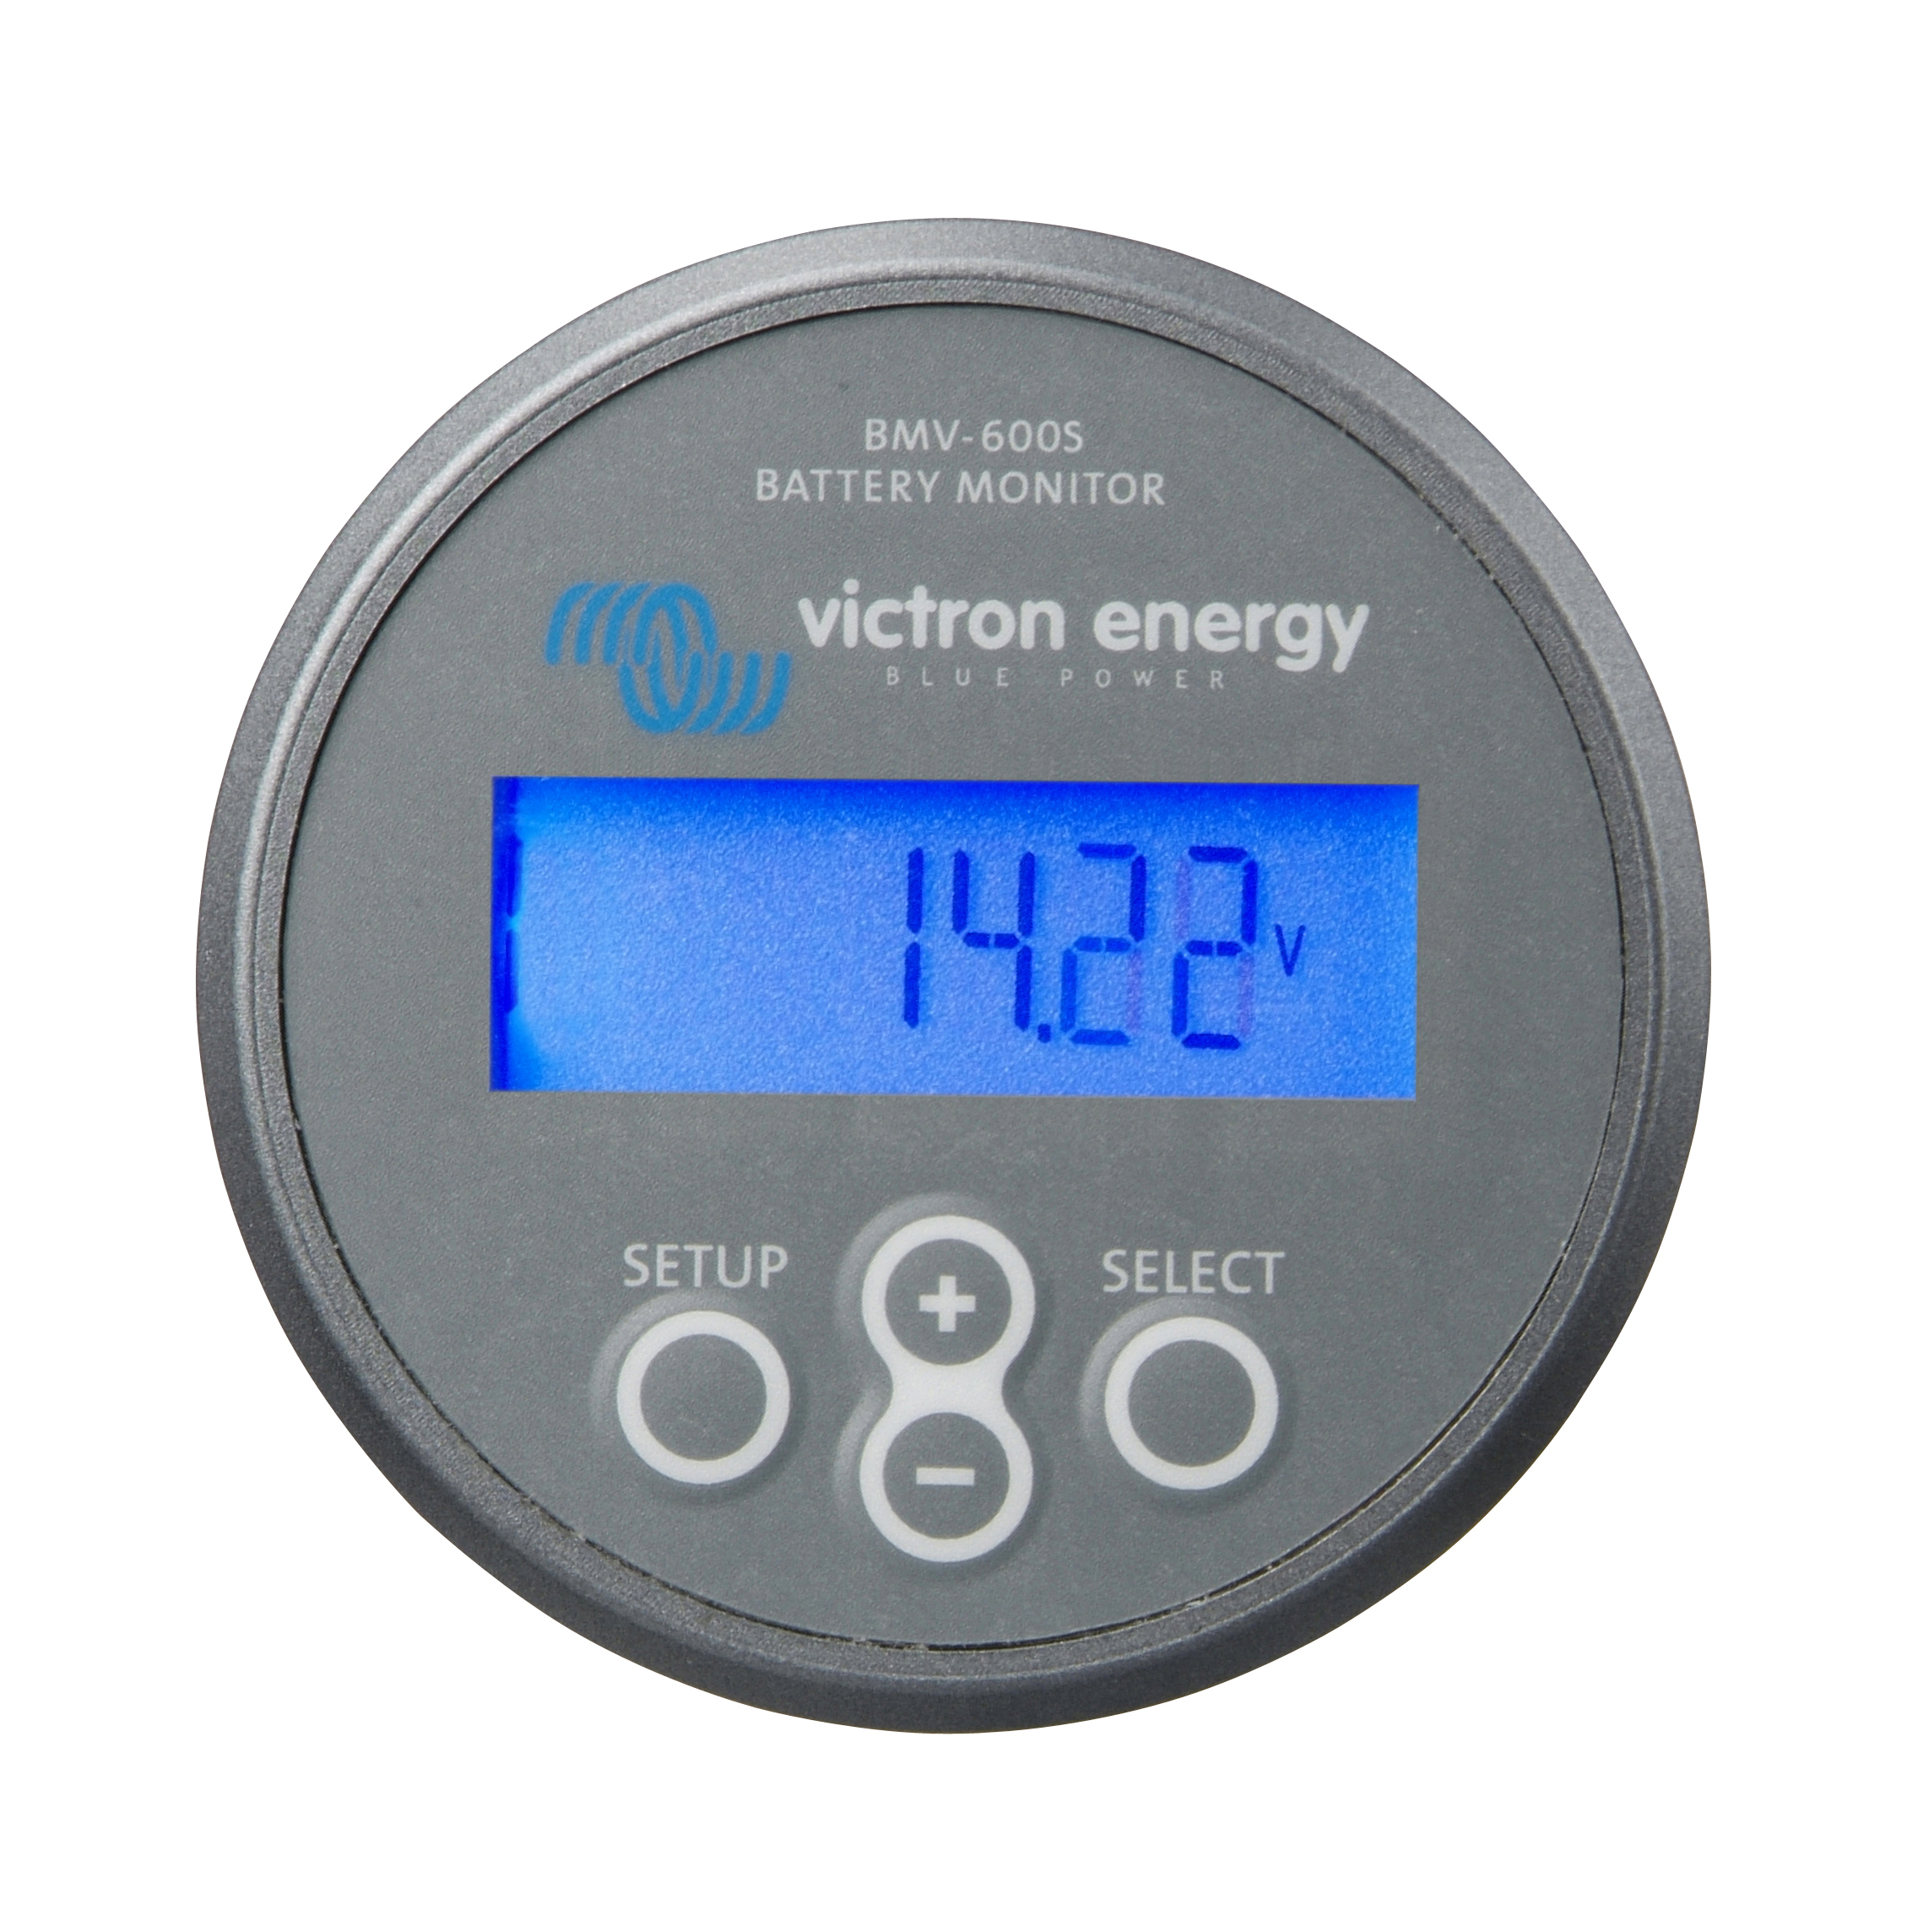 Victron battery monito amp-hour meter